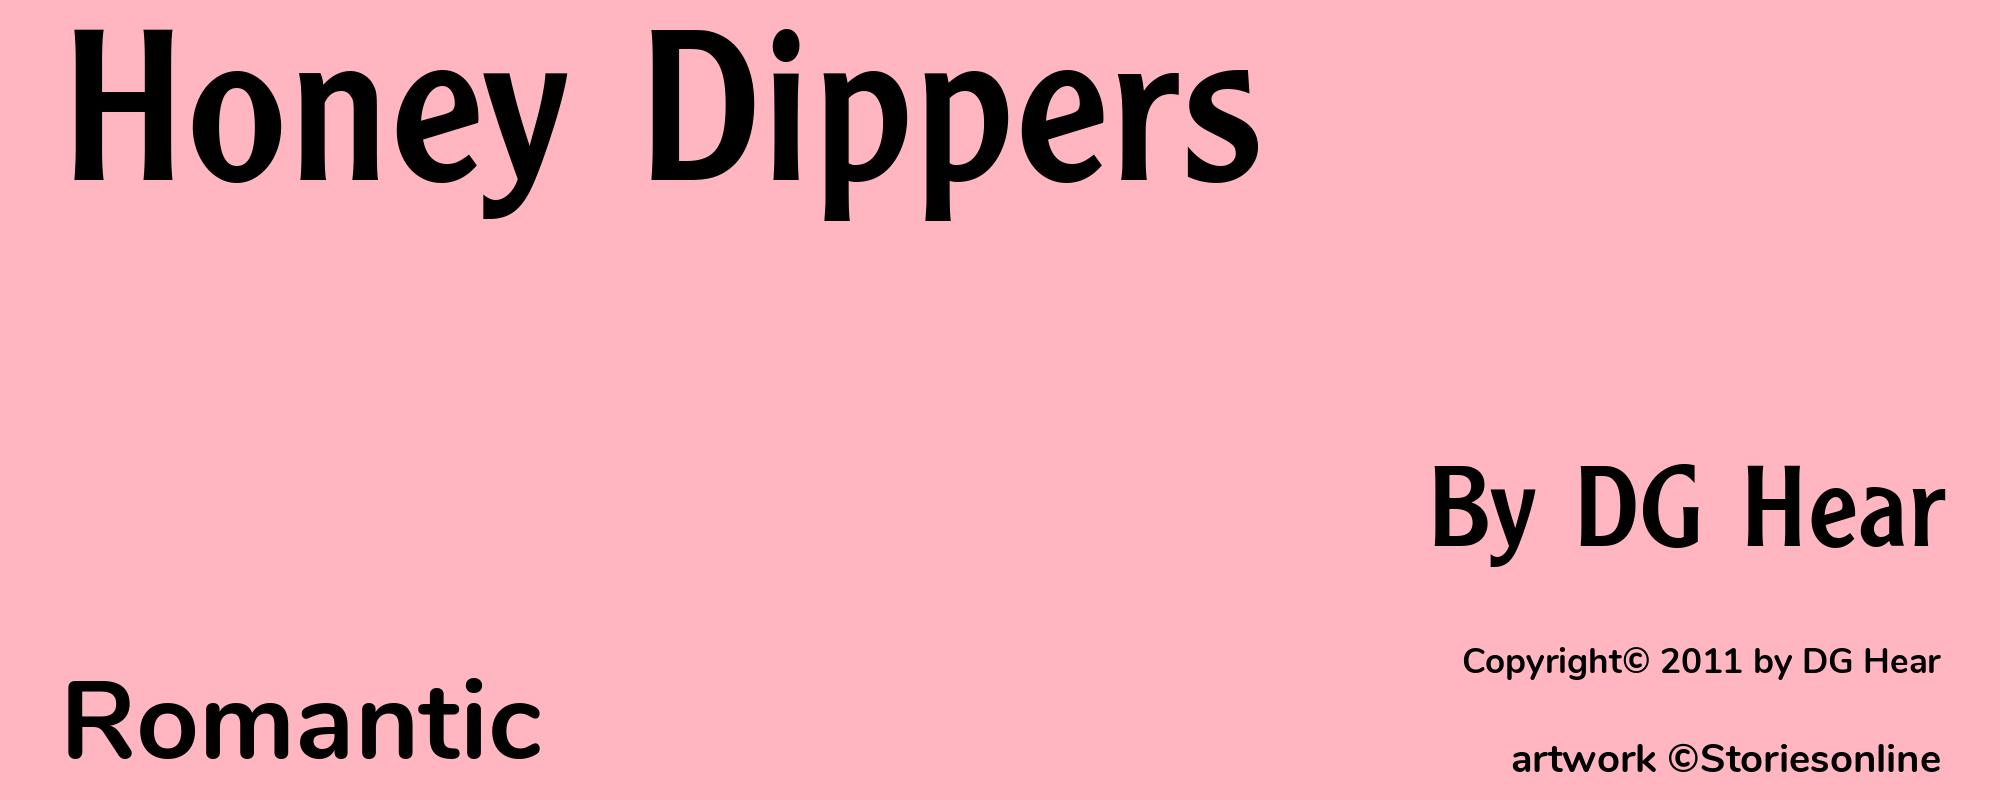 Honey Dippers - Cover